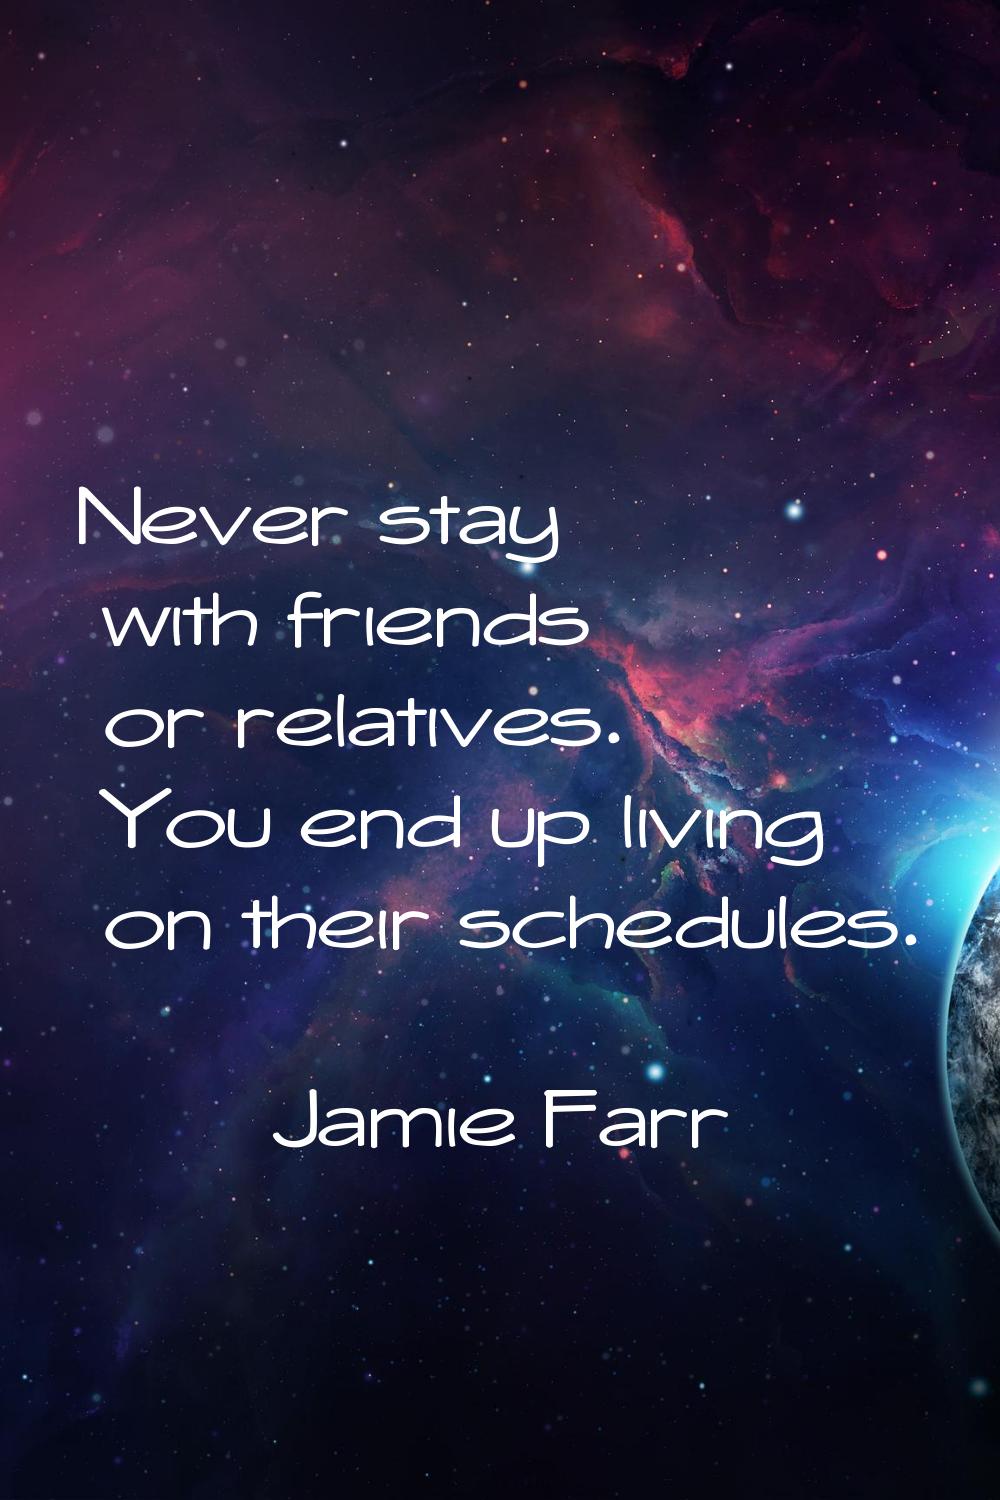 Never stay with friends or relatives. You end up living on their schedules.